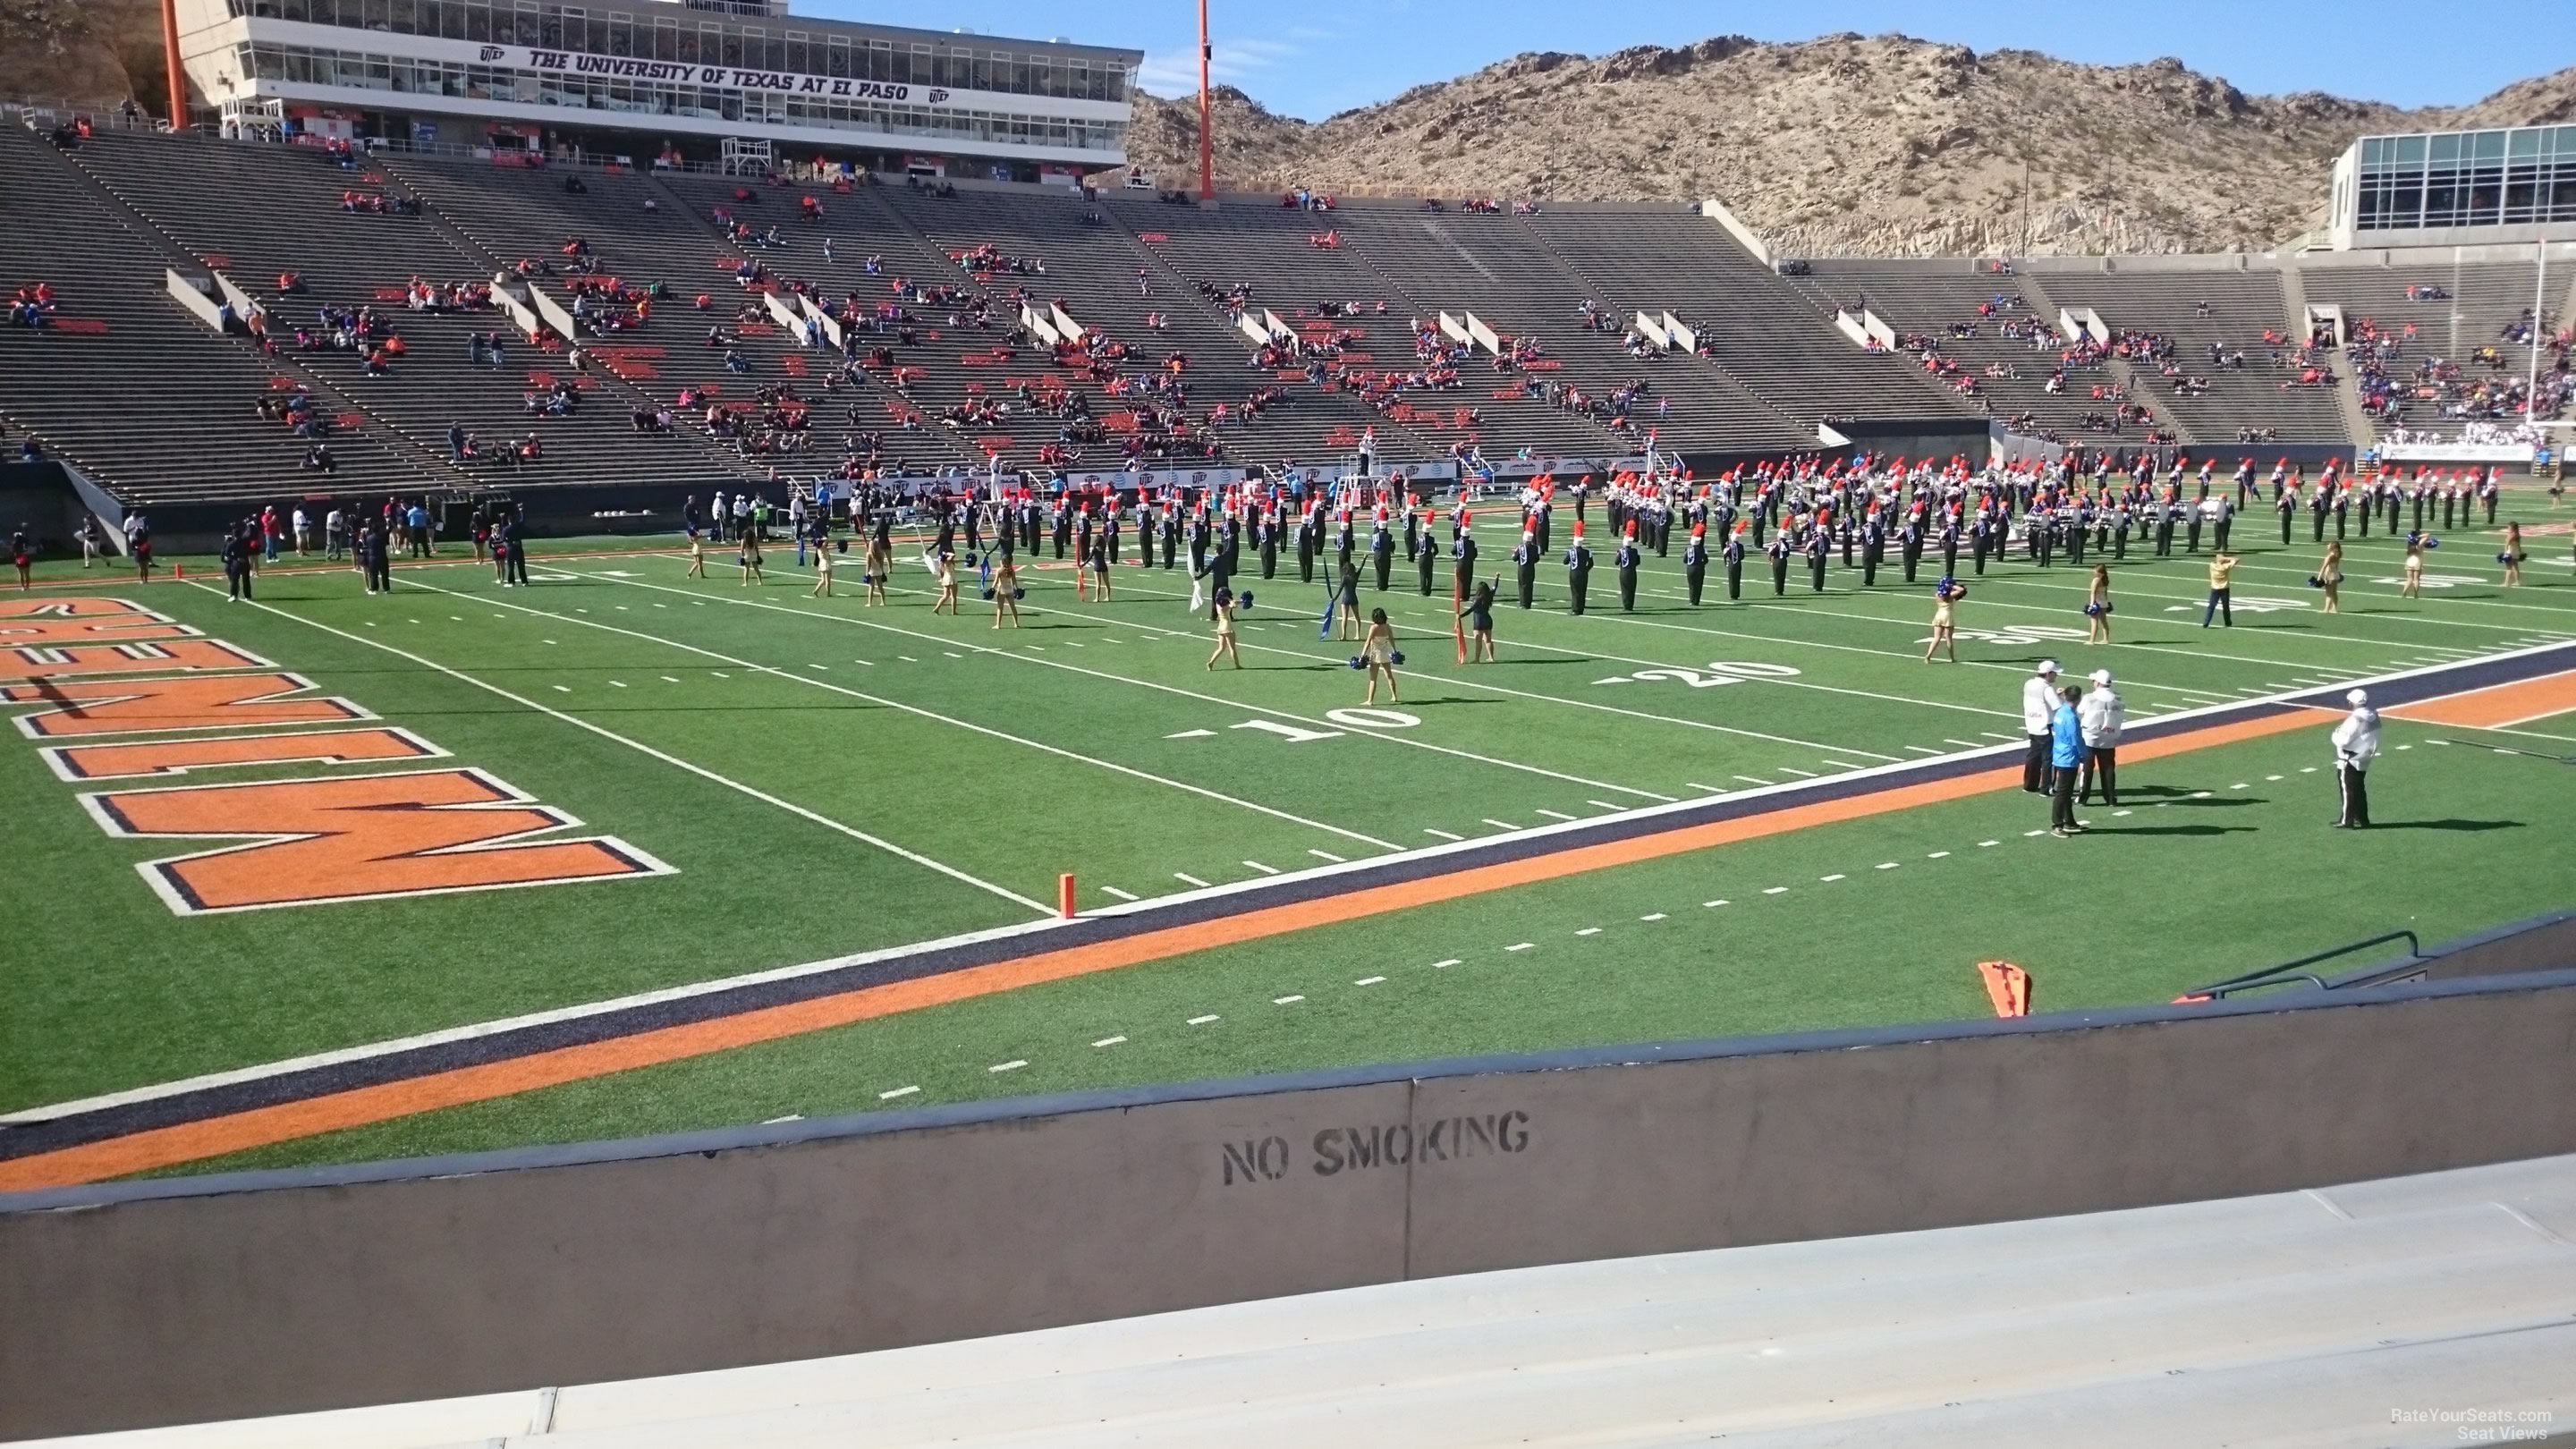 section 26, row 15 seat view  for football - sun bowl